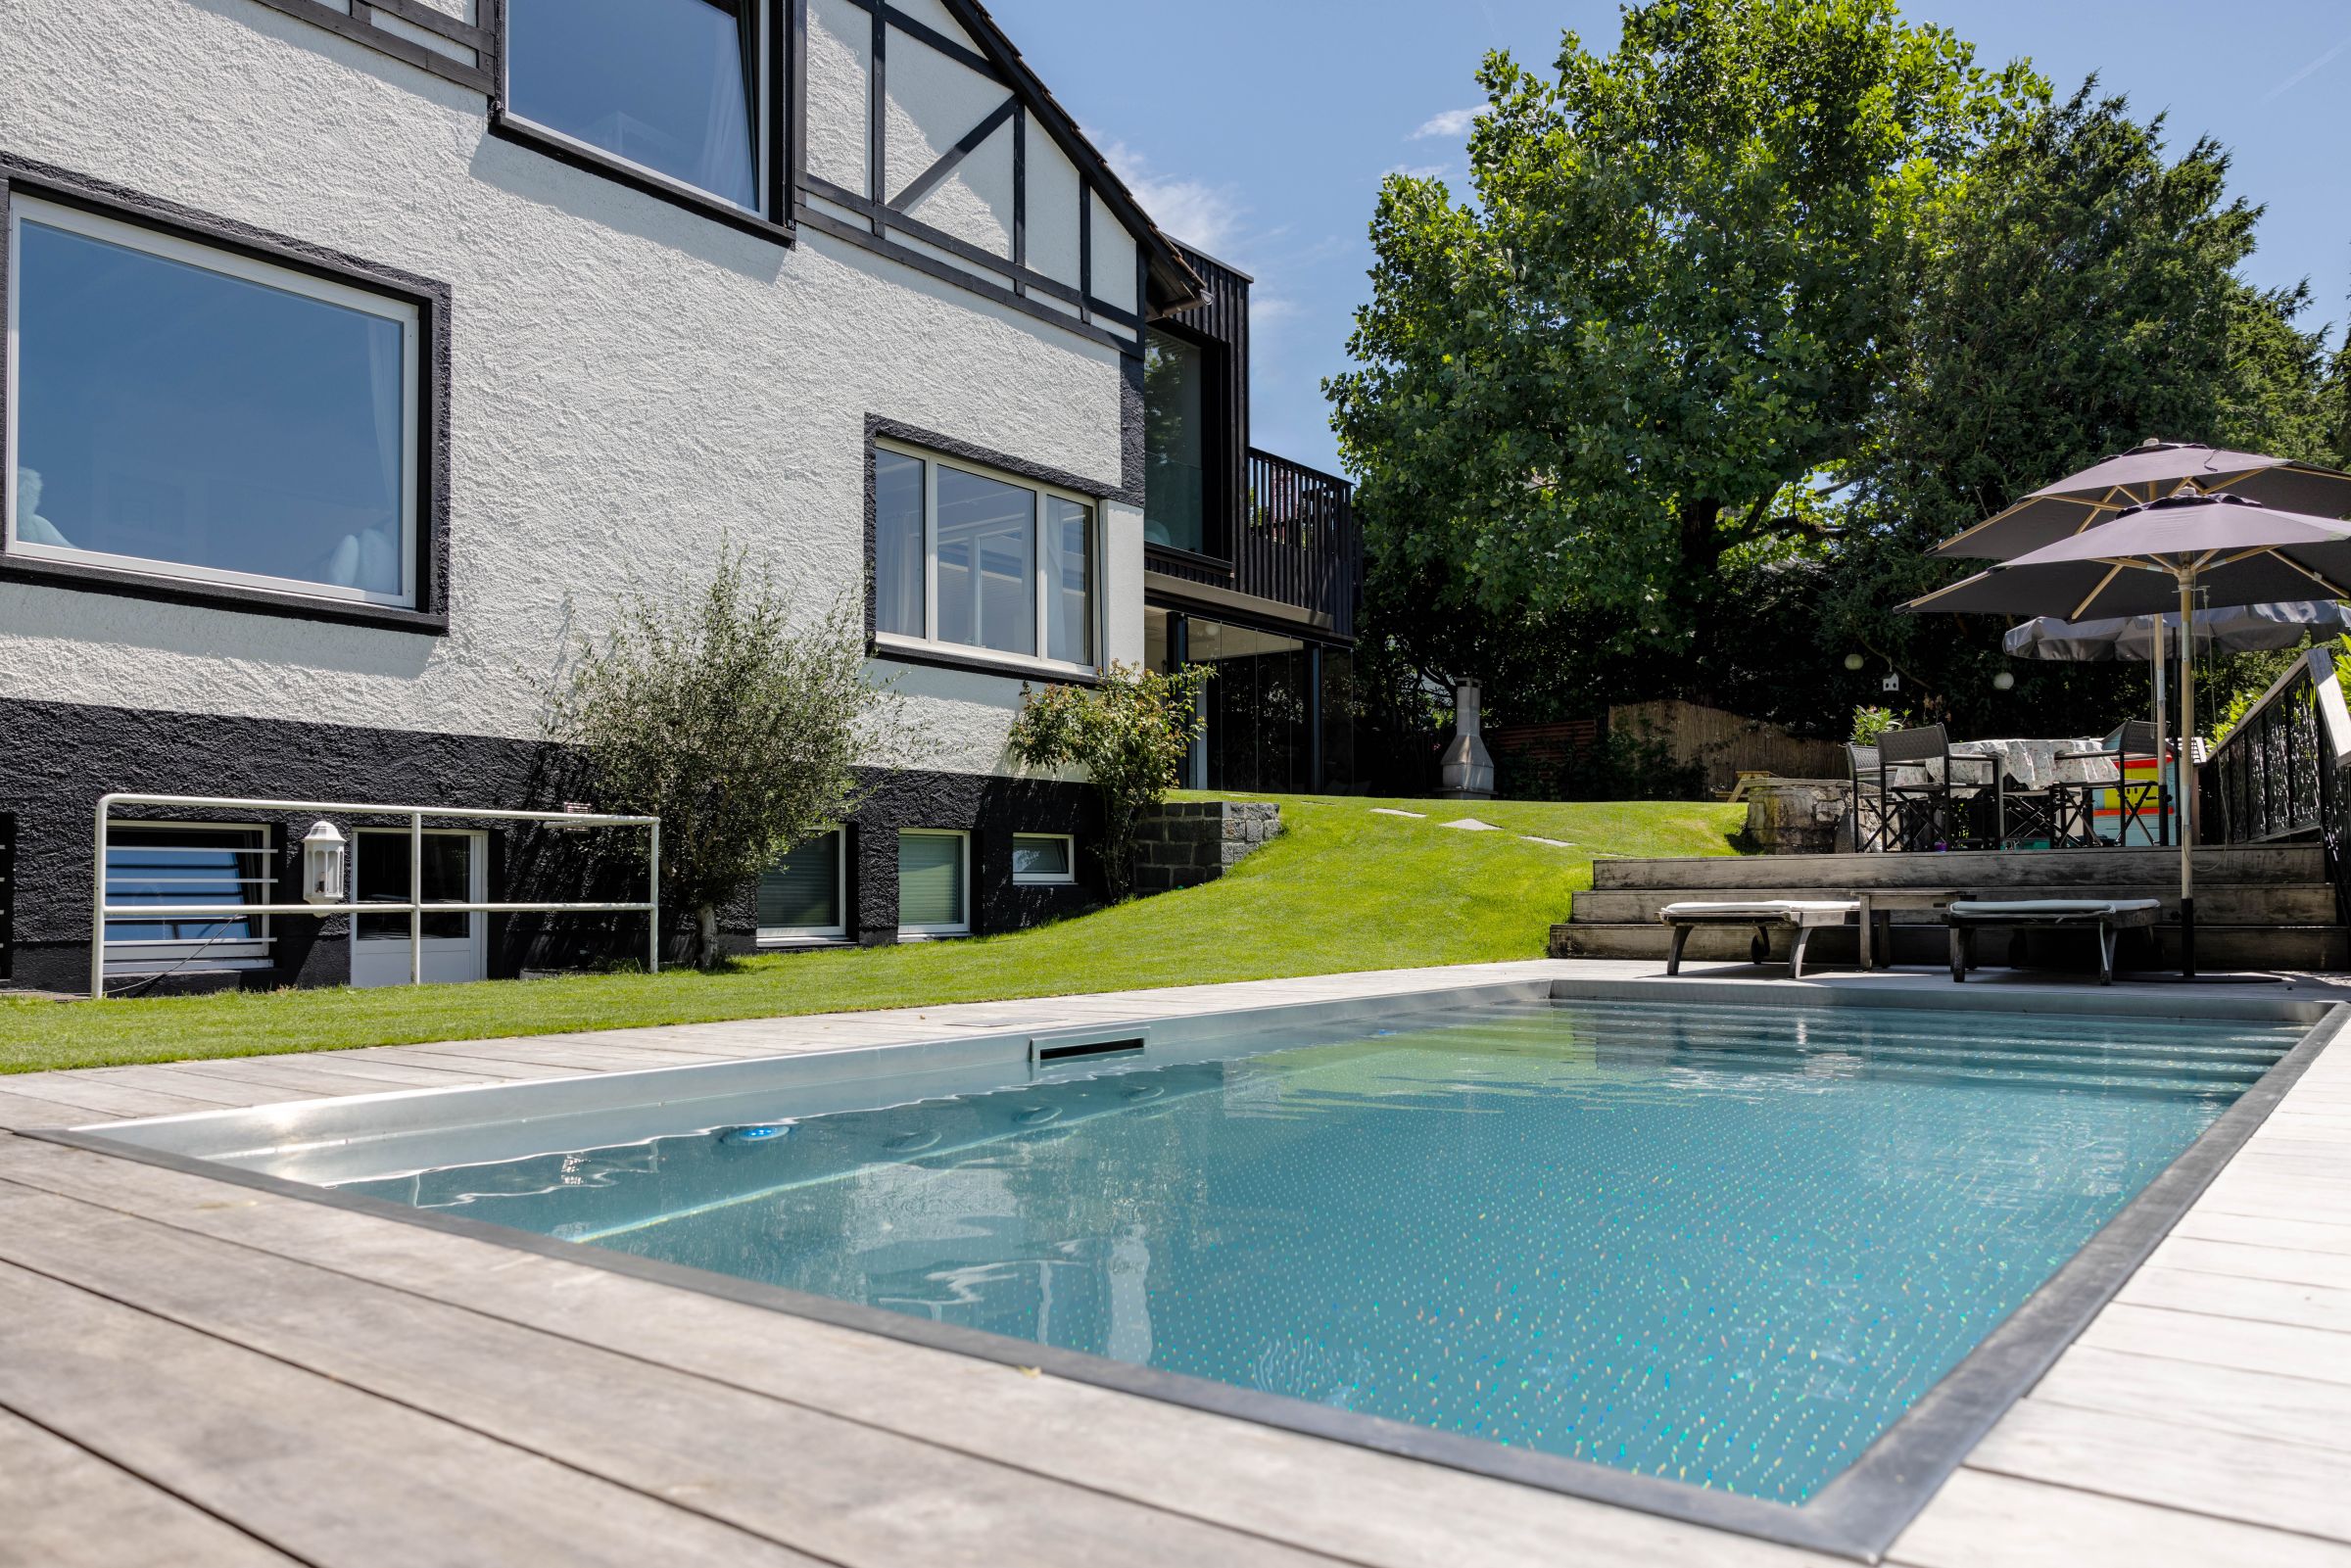 A remarkable feature of the garden is the wood pool deck that harmoniously blends with the hillside